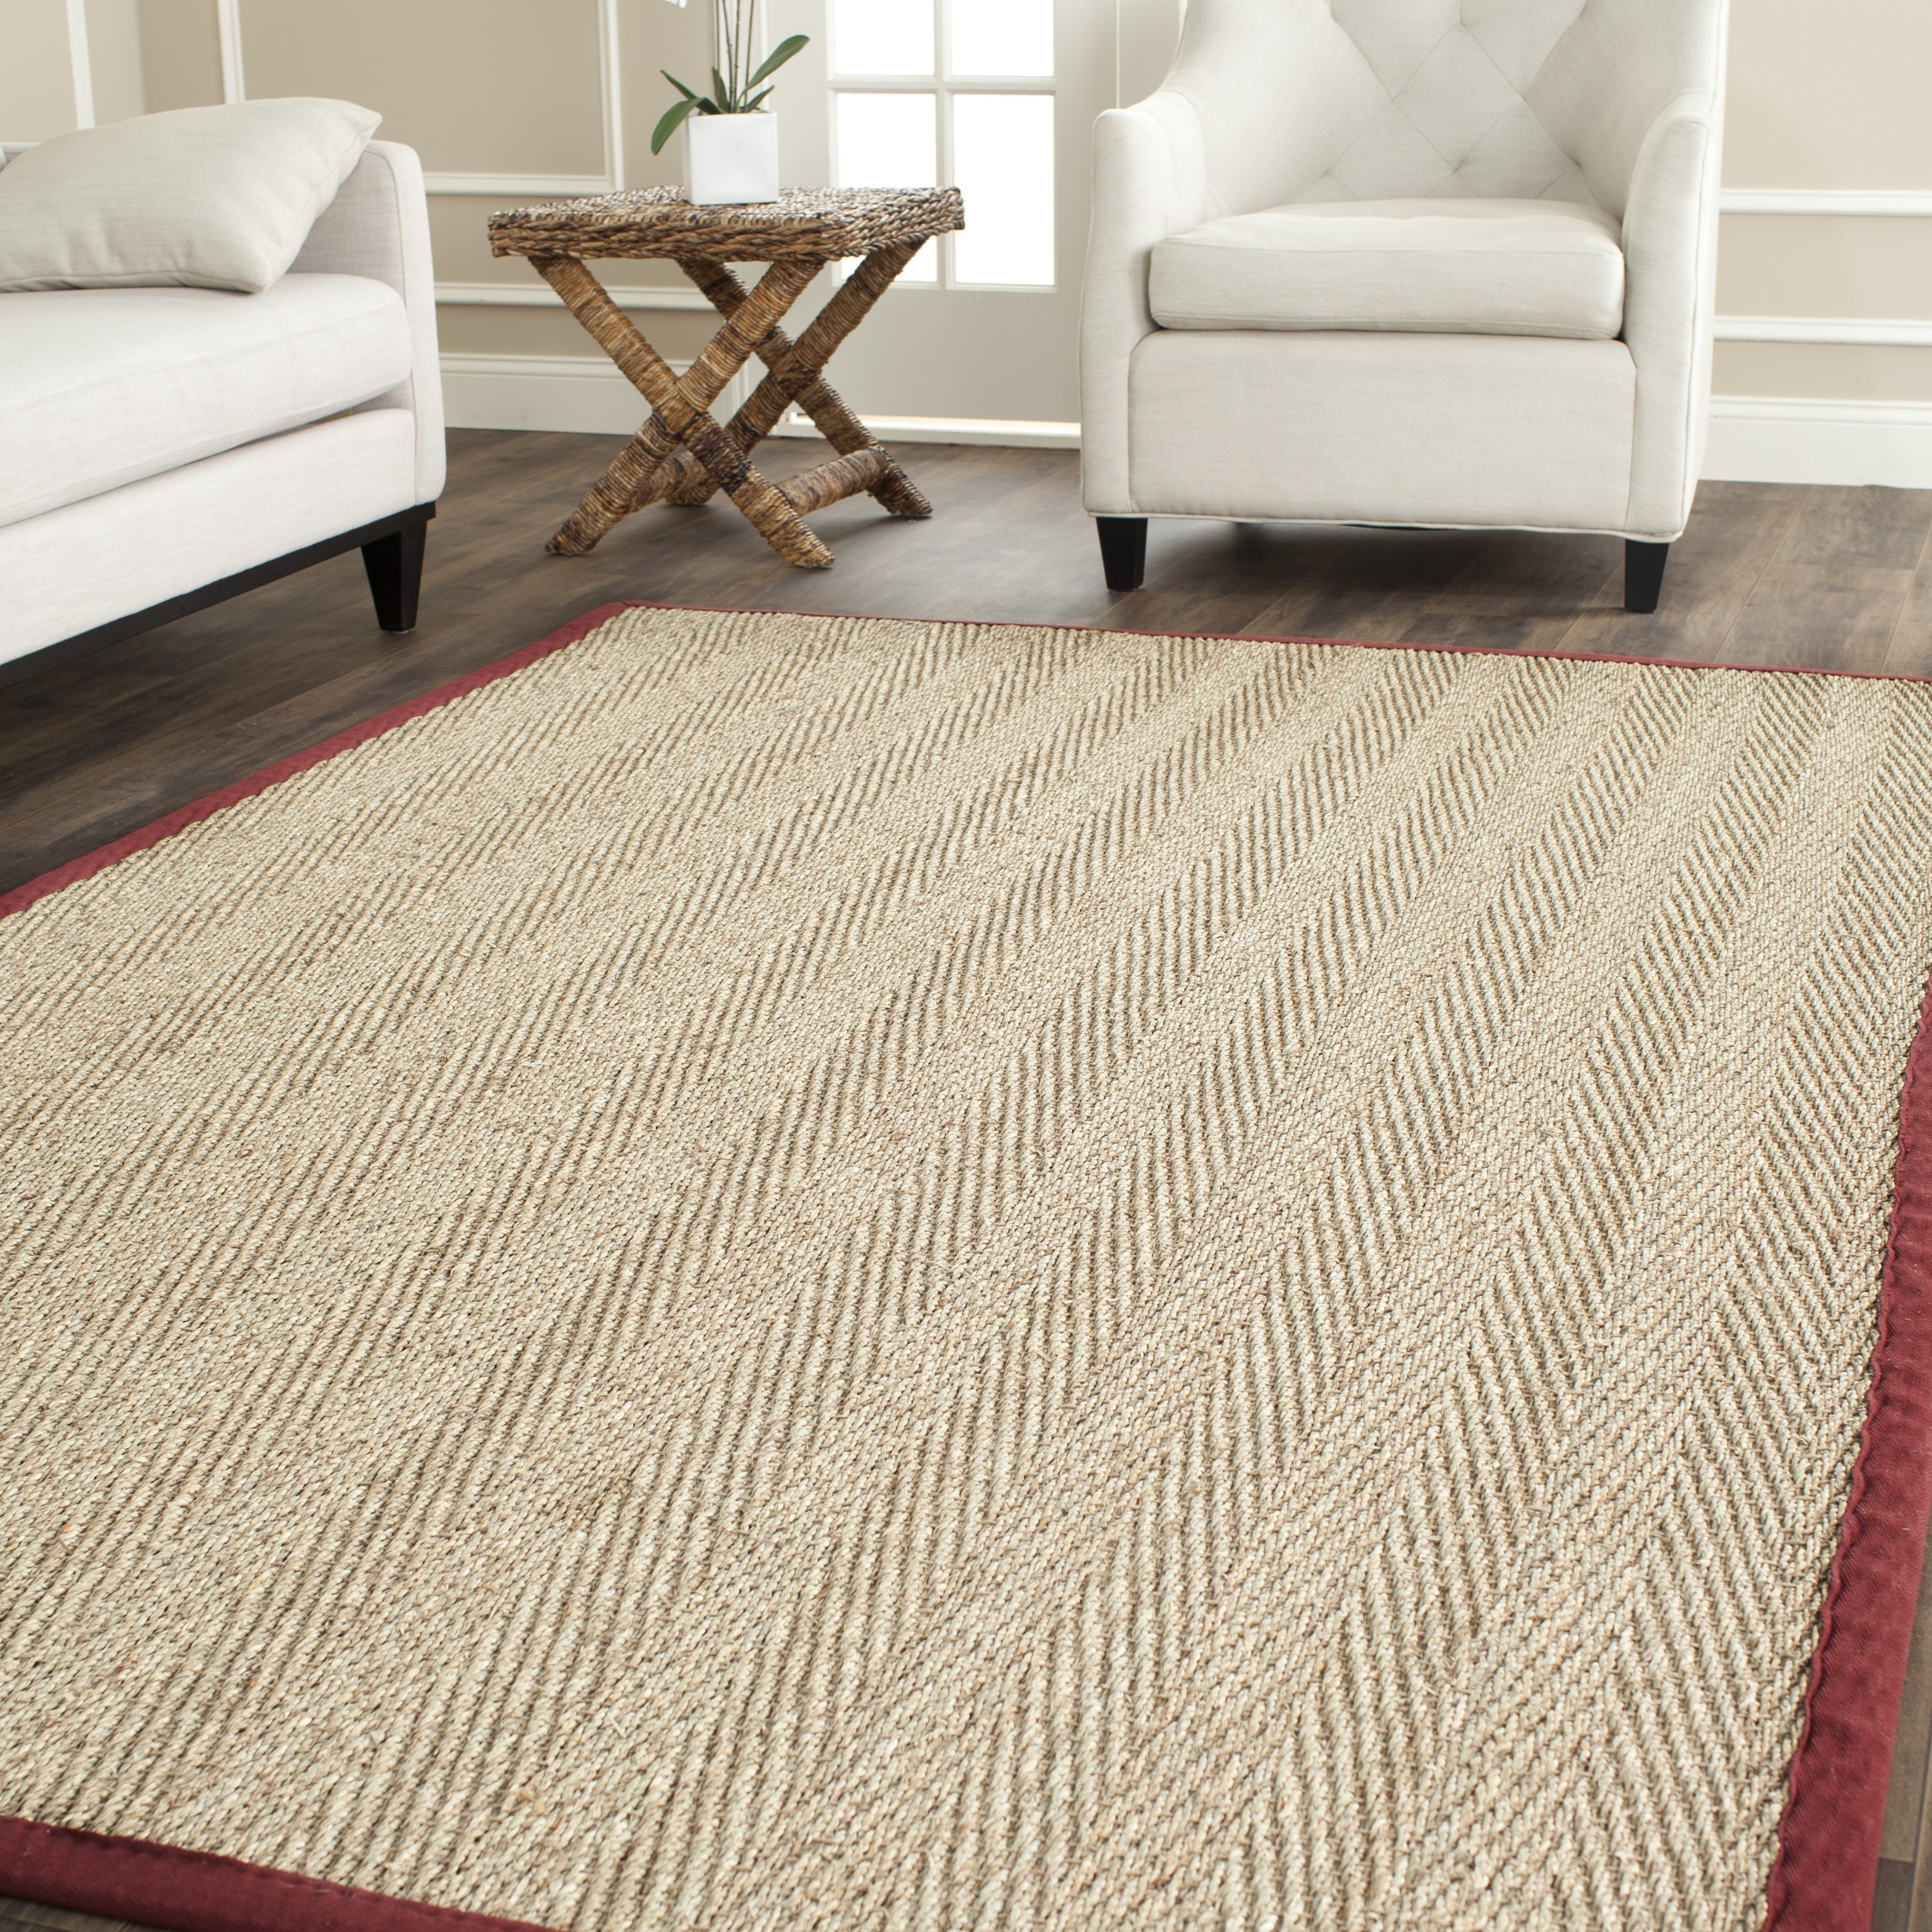 SAFAVIEH Natural Fiber Maisy Border Seagrass Area Rug, Natural/Red, 8' x 10' - image 3 of 8